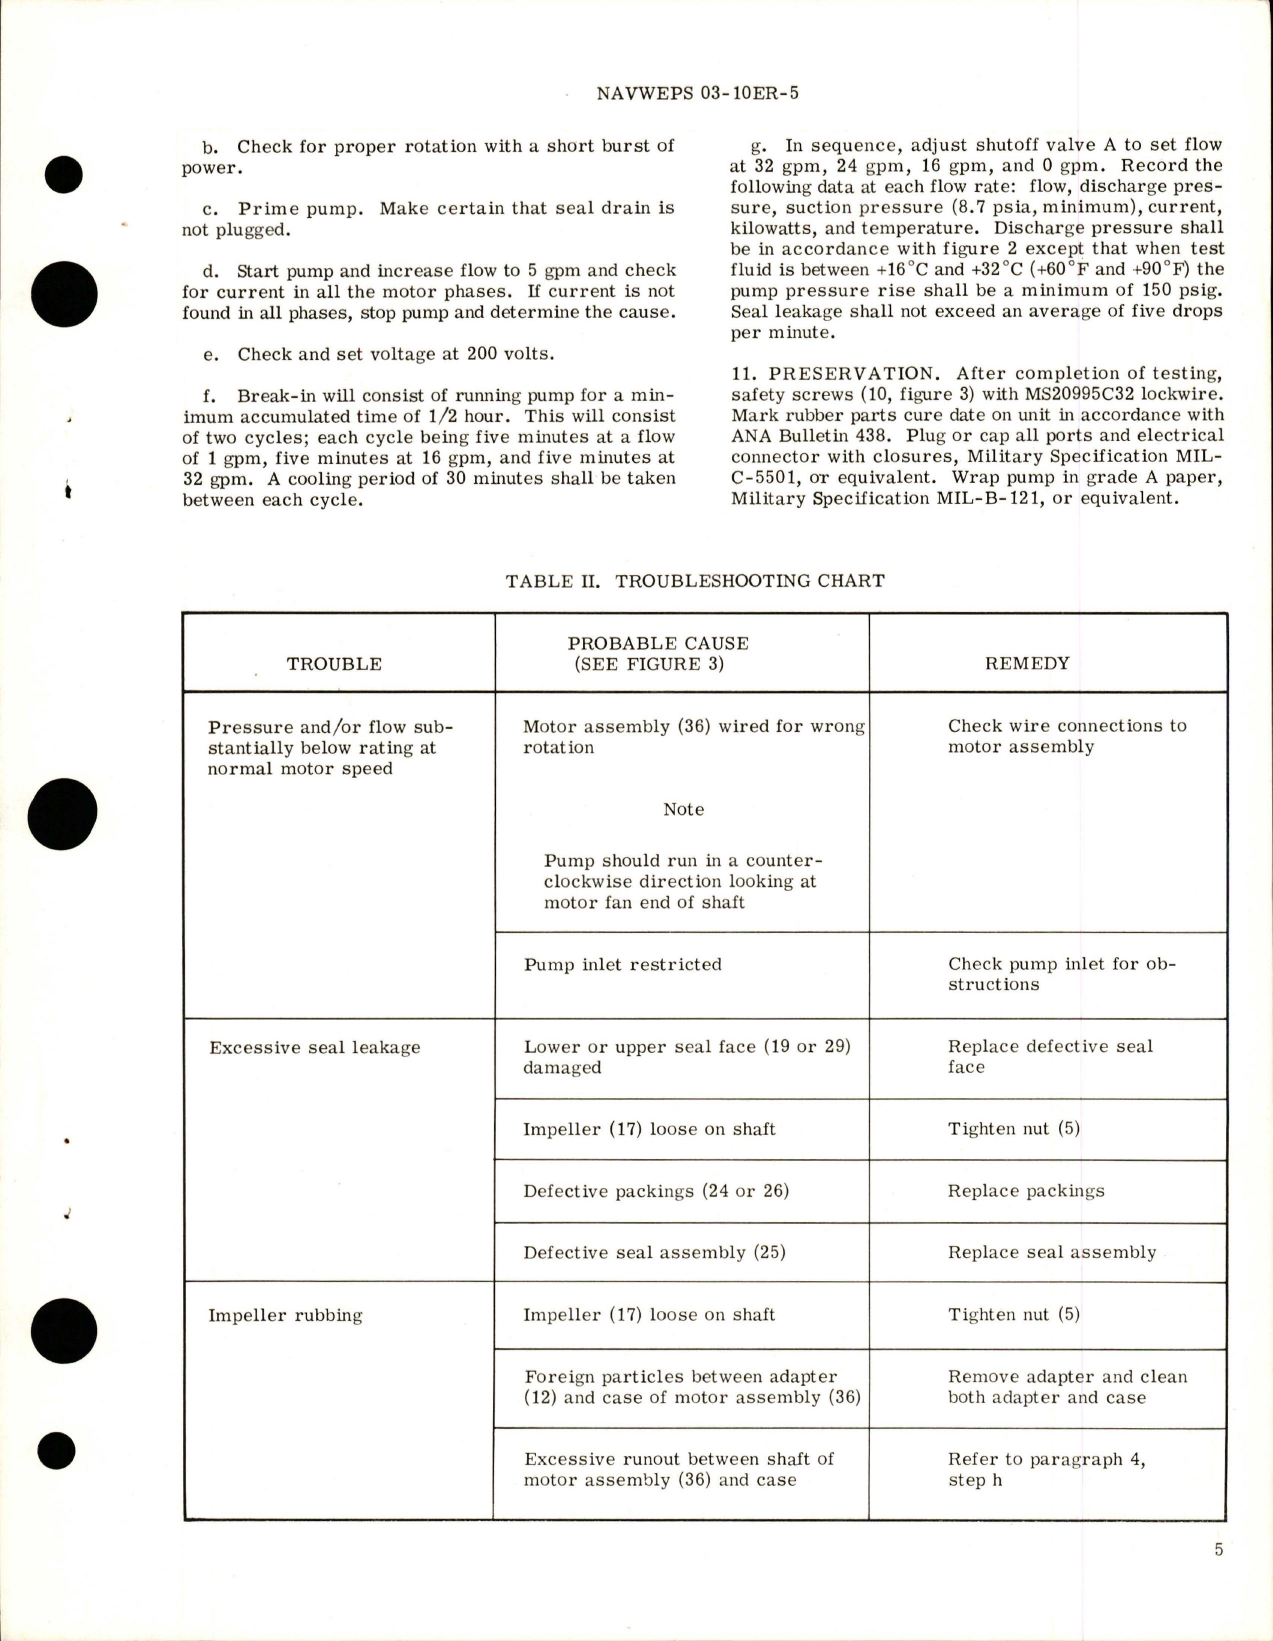 Sample page 5 from AirCorps Library document: Overhaul Instructions with Parts for Water Alcohol Injection Pump - Part 6333-3